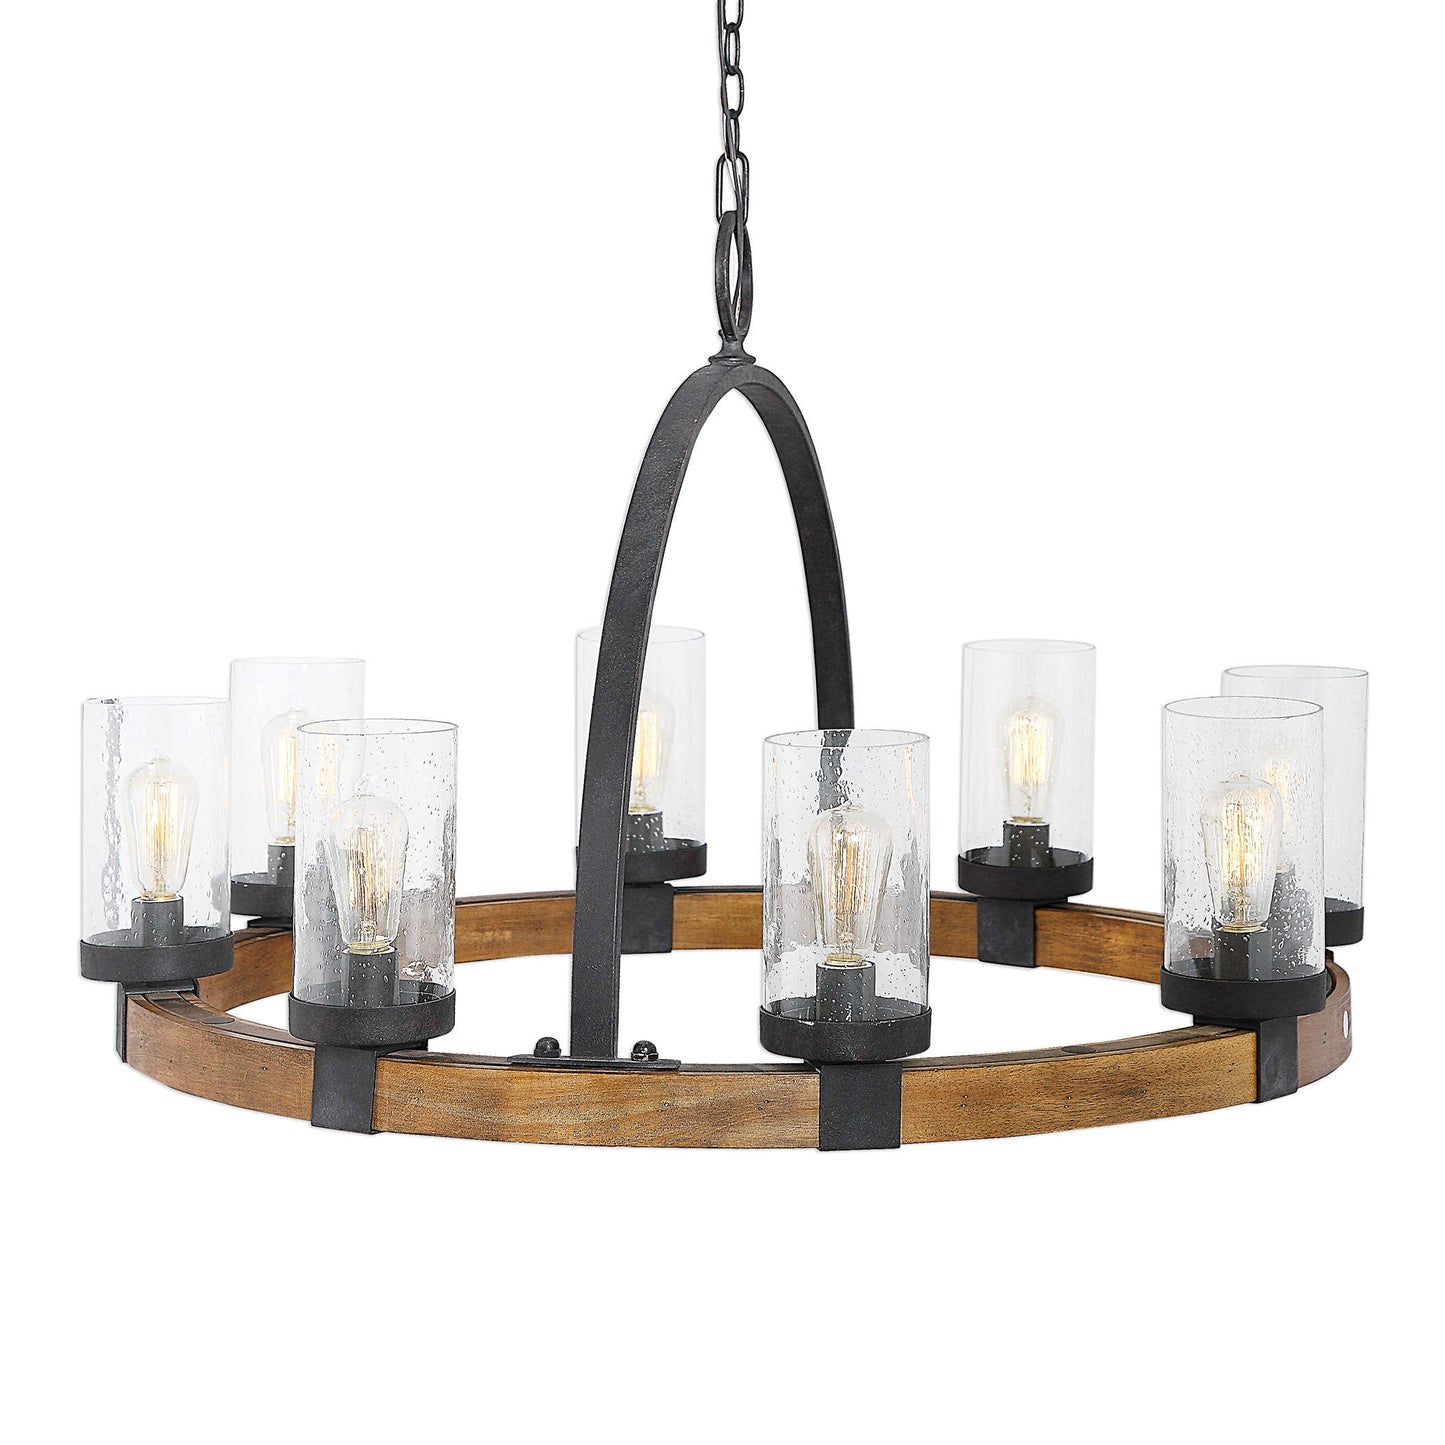 ATWOOD CHANDELIER